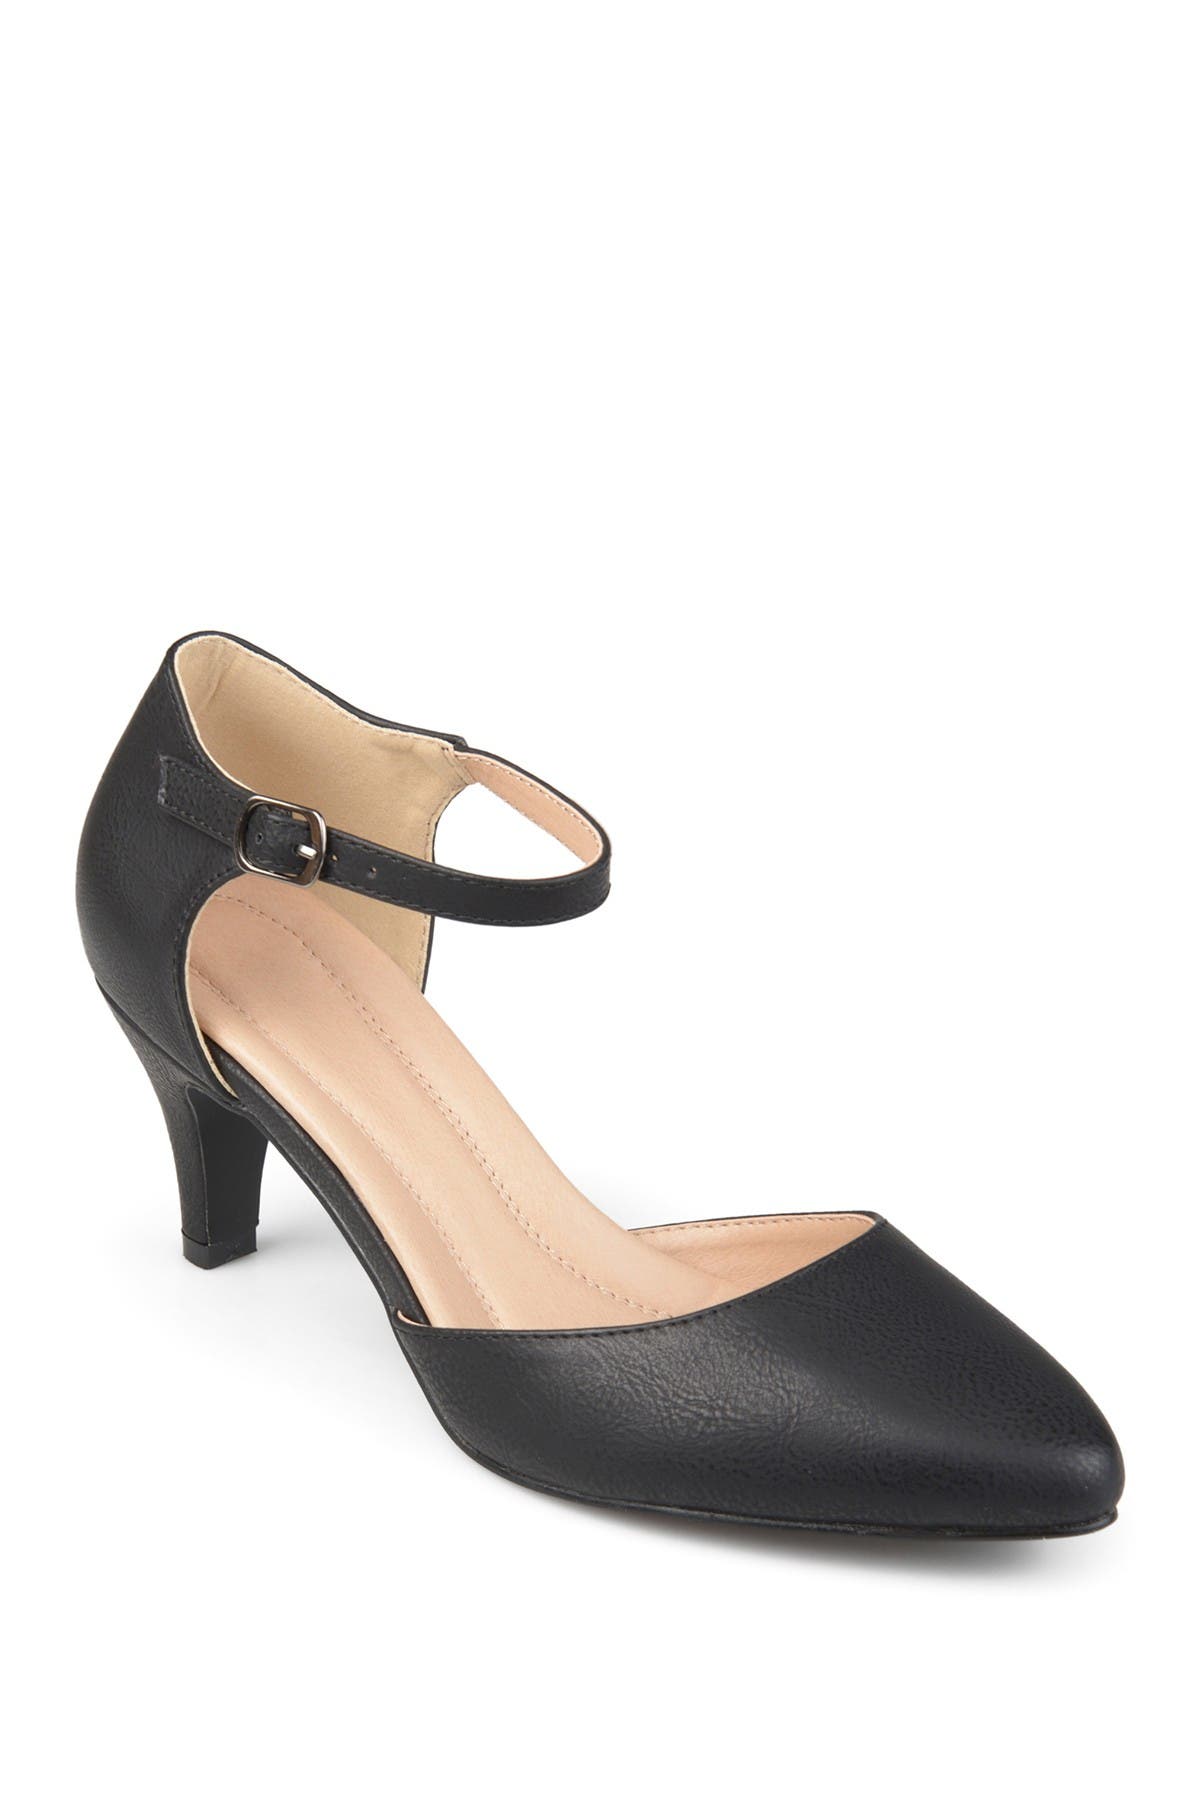 journee collection pumps